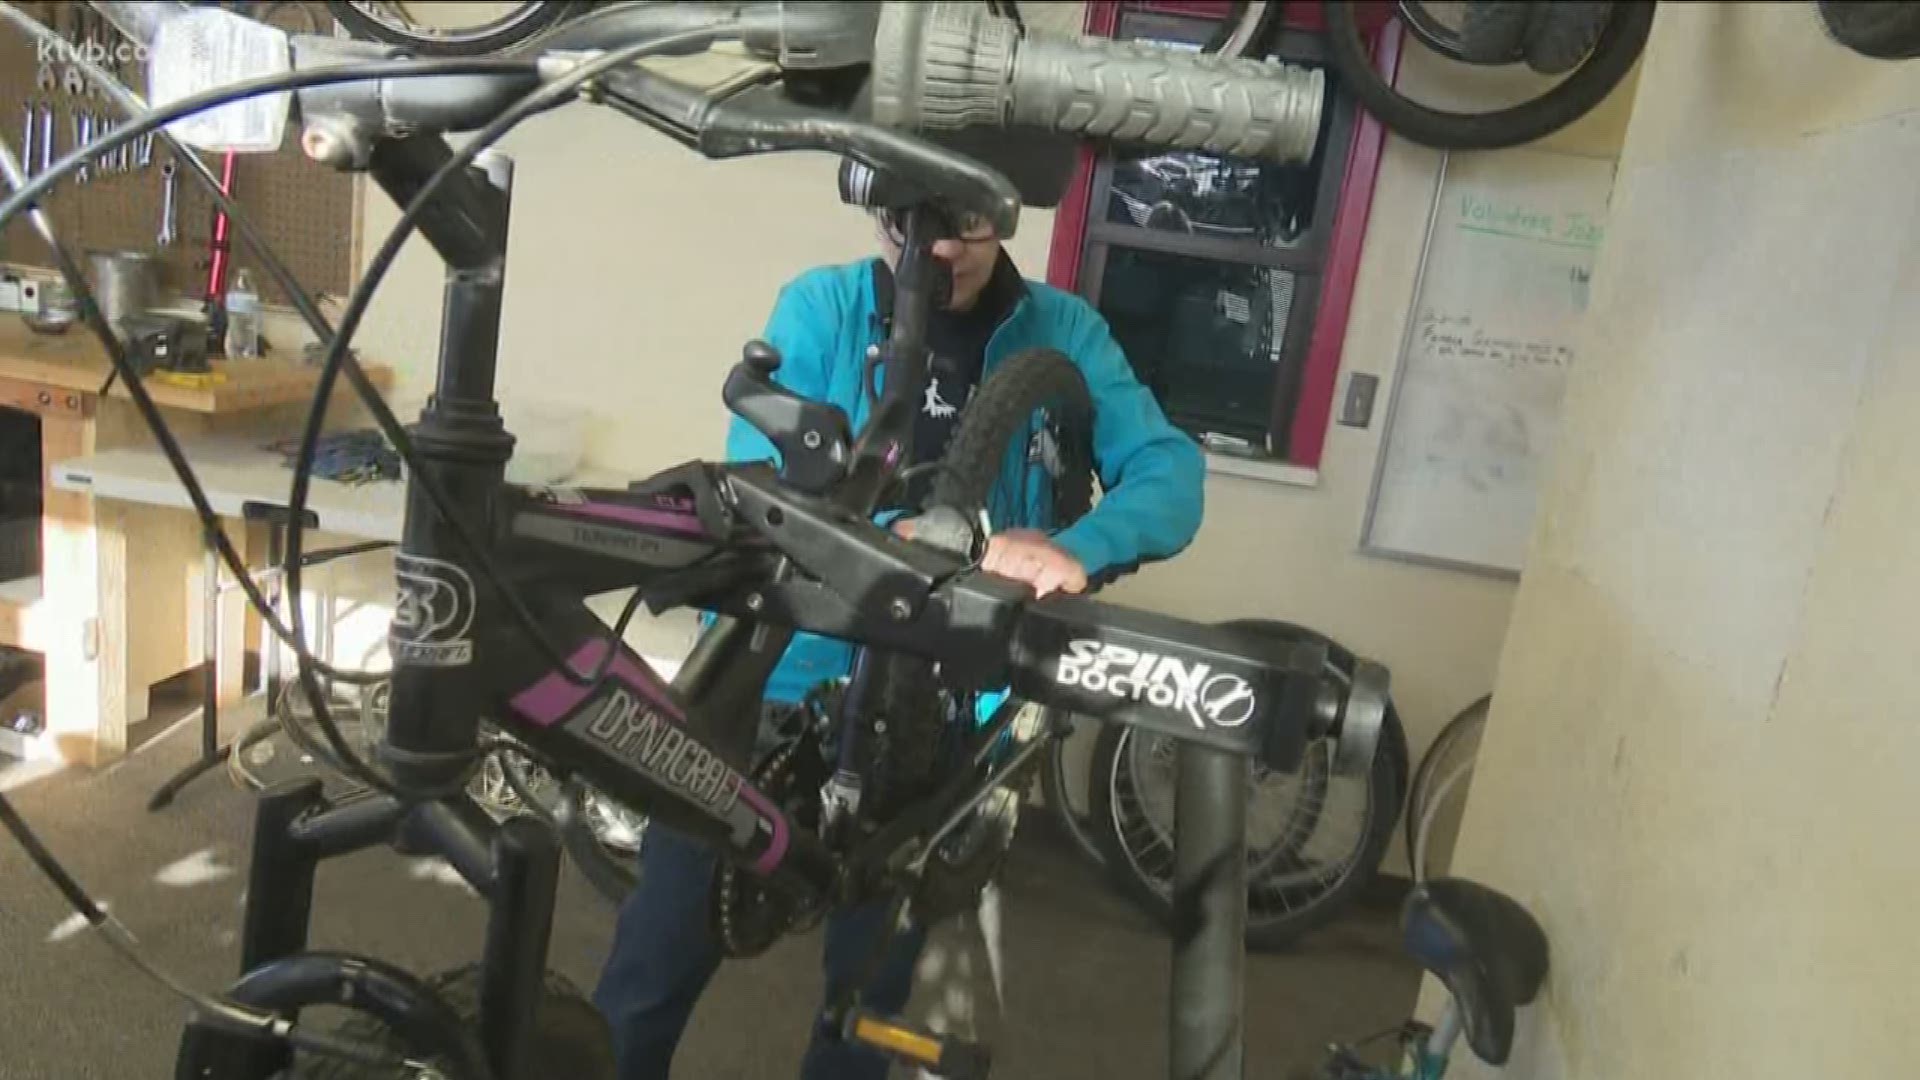 "Bicycle shops in shops in Boise have been slammed, they have had more business than they know what to do with over the past couple of weeks," the CEO said.